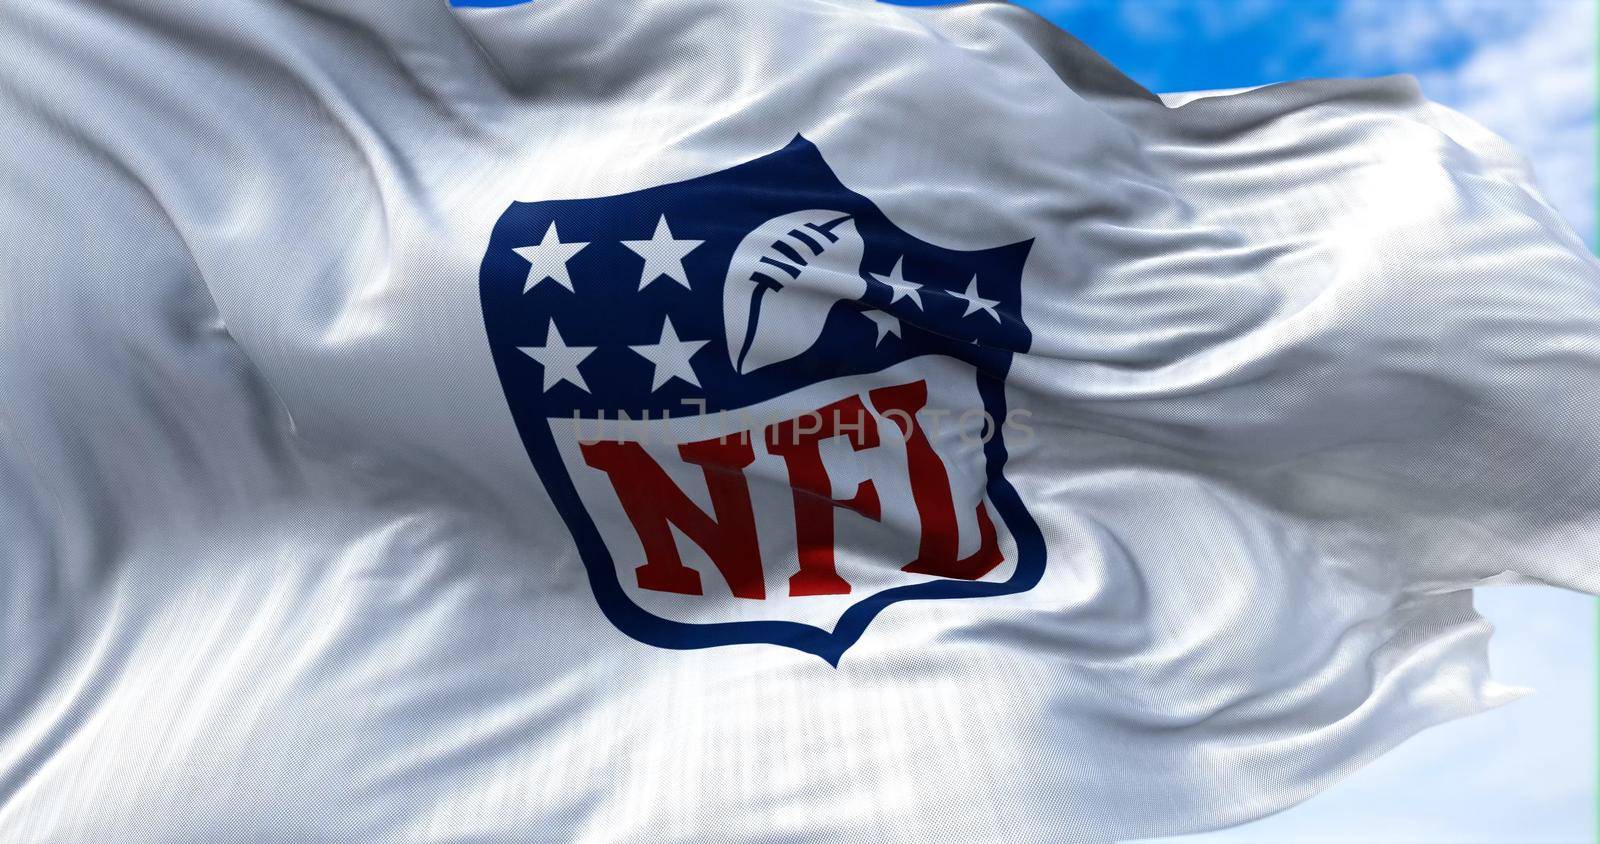 Inglewood, CA, USA, January 2022: The flag with the NFL logo waving in the wind. NFL is a professional American football league